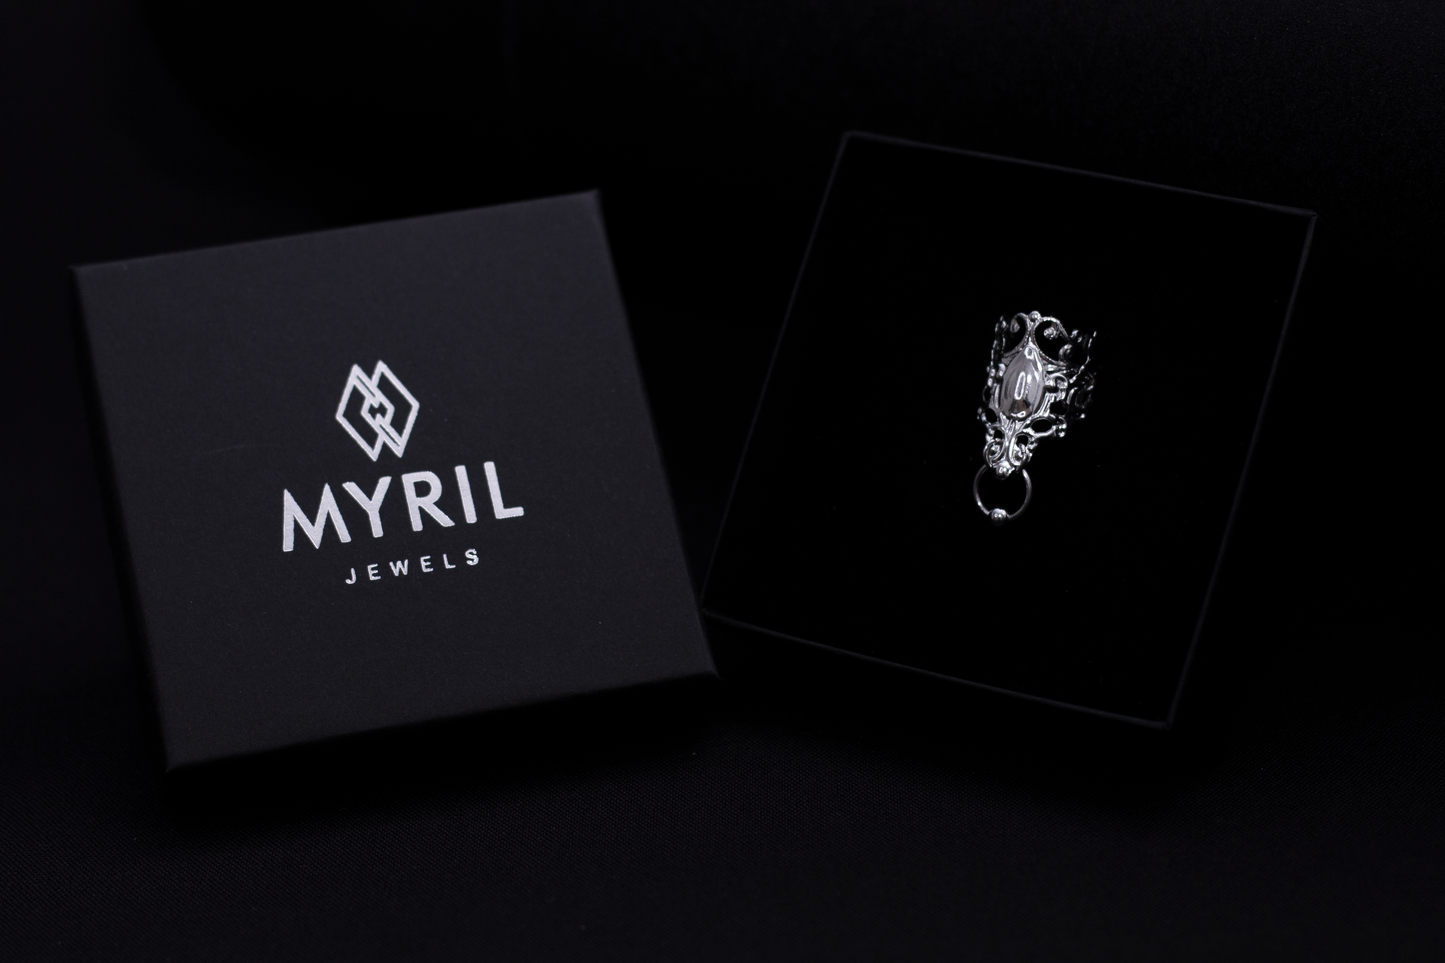  A Myril Jewels midi ring with a gothic design captures the essence of neo-goth style. Perfect for those seeking Halloween or punk jewelry, it blends gothic-chic and whimsigoth trends. Ideal for rave party wear, festivals, or as a bold statement piece. This unique ring makes for an intriguing goth girlfriend or friend gift idea.